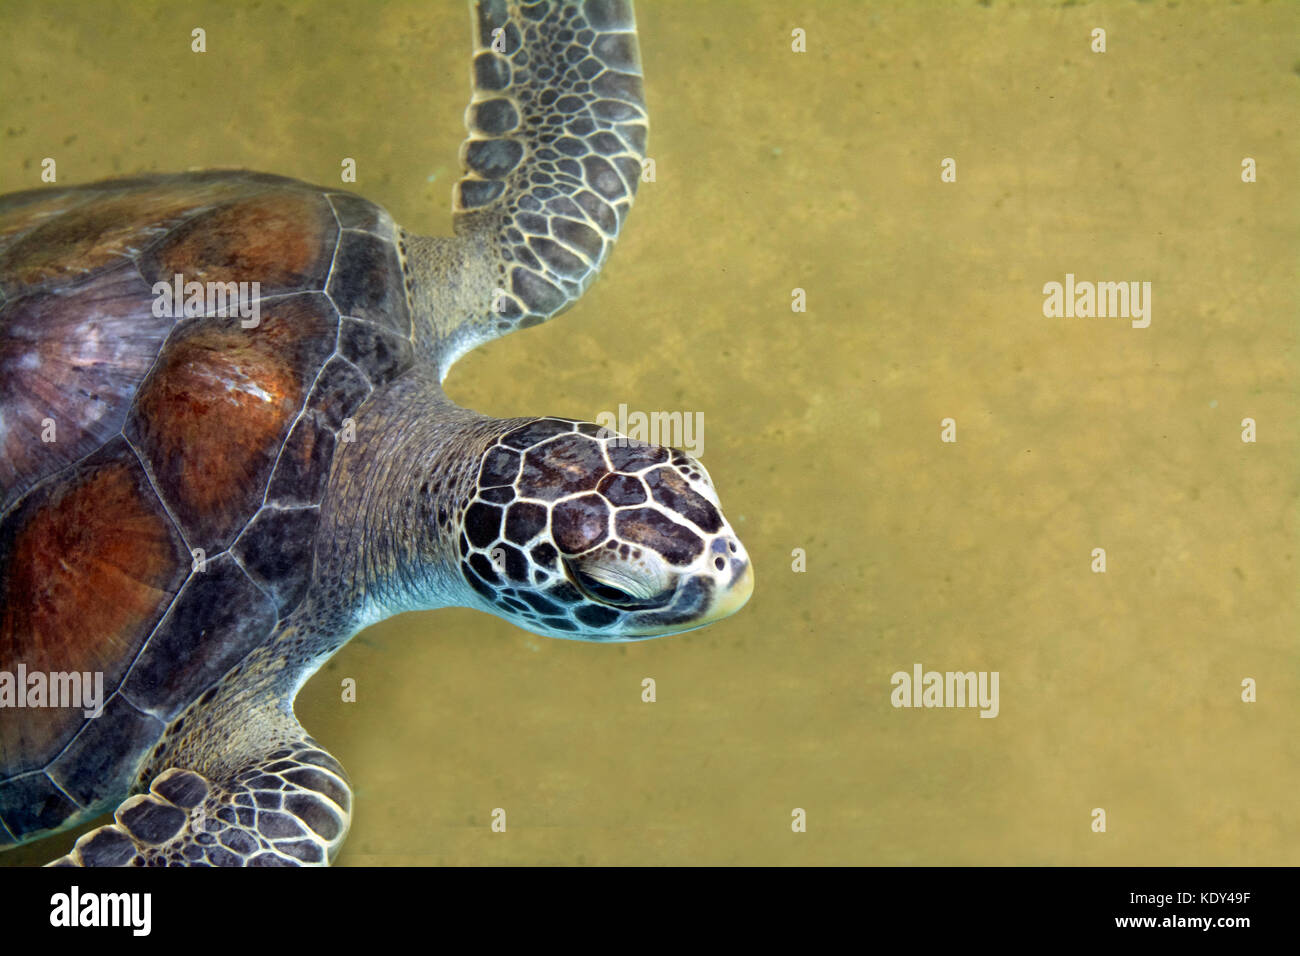 Protected sea turtle swims smoothly in sea turtle centre in Mexico Stock Photo